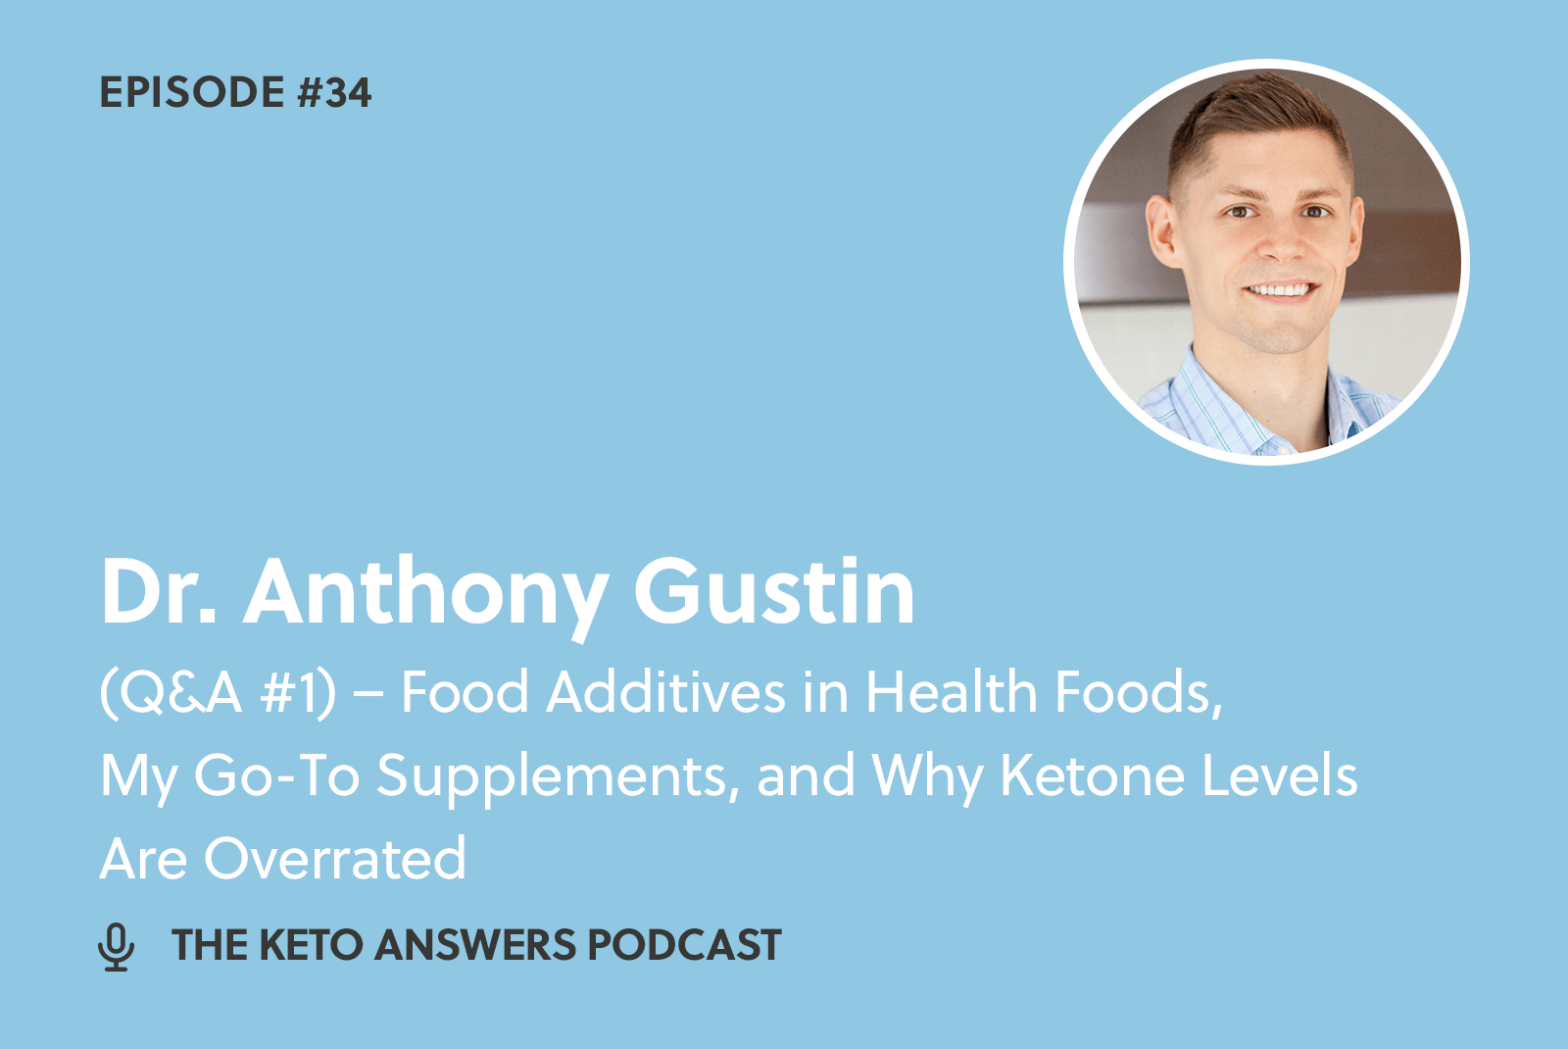 034: Dr. Anthony Gustin - (Q&A #1) - Food Additives in Health Foods, My Go-To Supplements, and Why Ketone Levels Are Overrated